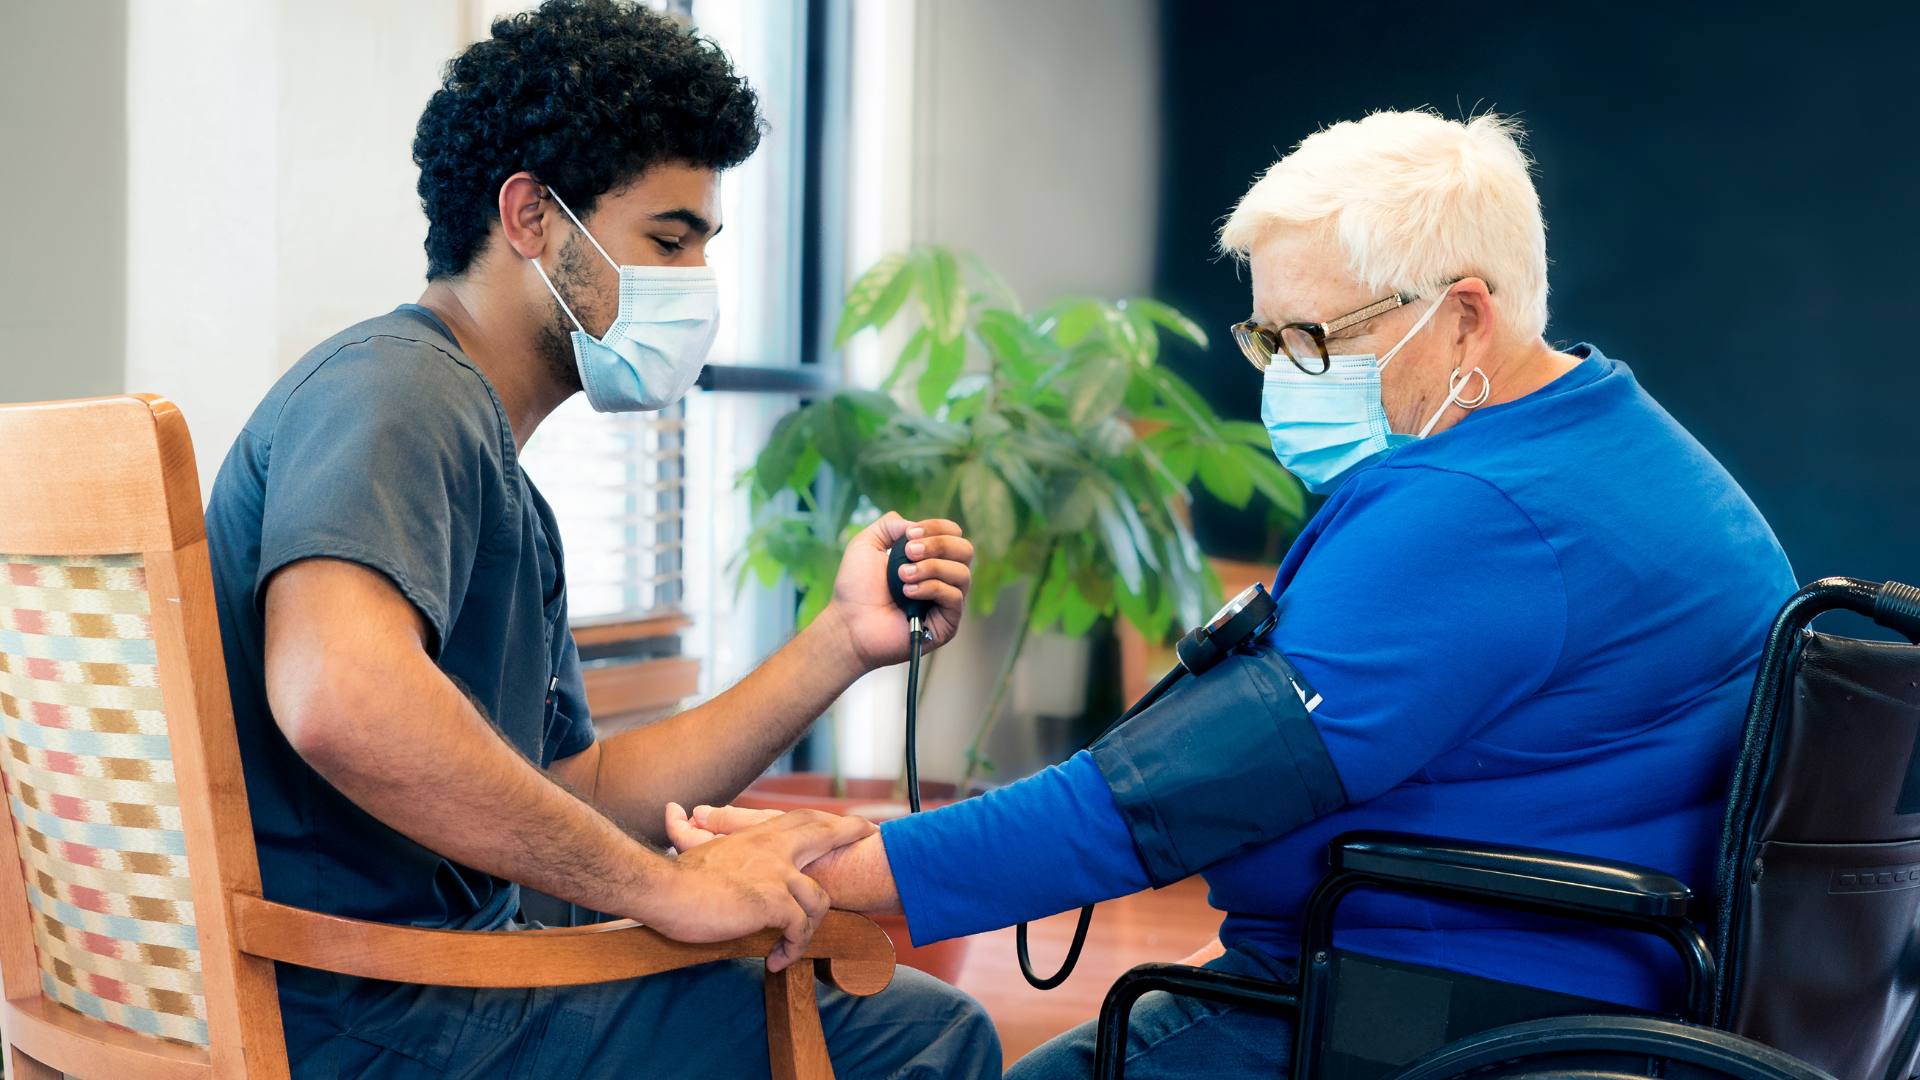 An image of a CNA taking the blood pressure of an elderly nursing home patient, highlighting the importance of CNA jobs in nursing homes.